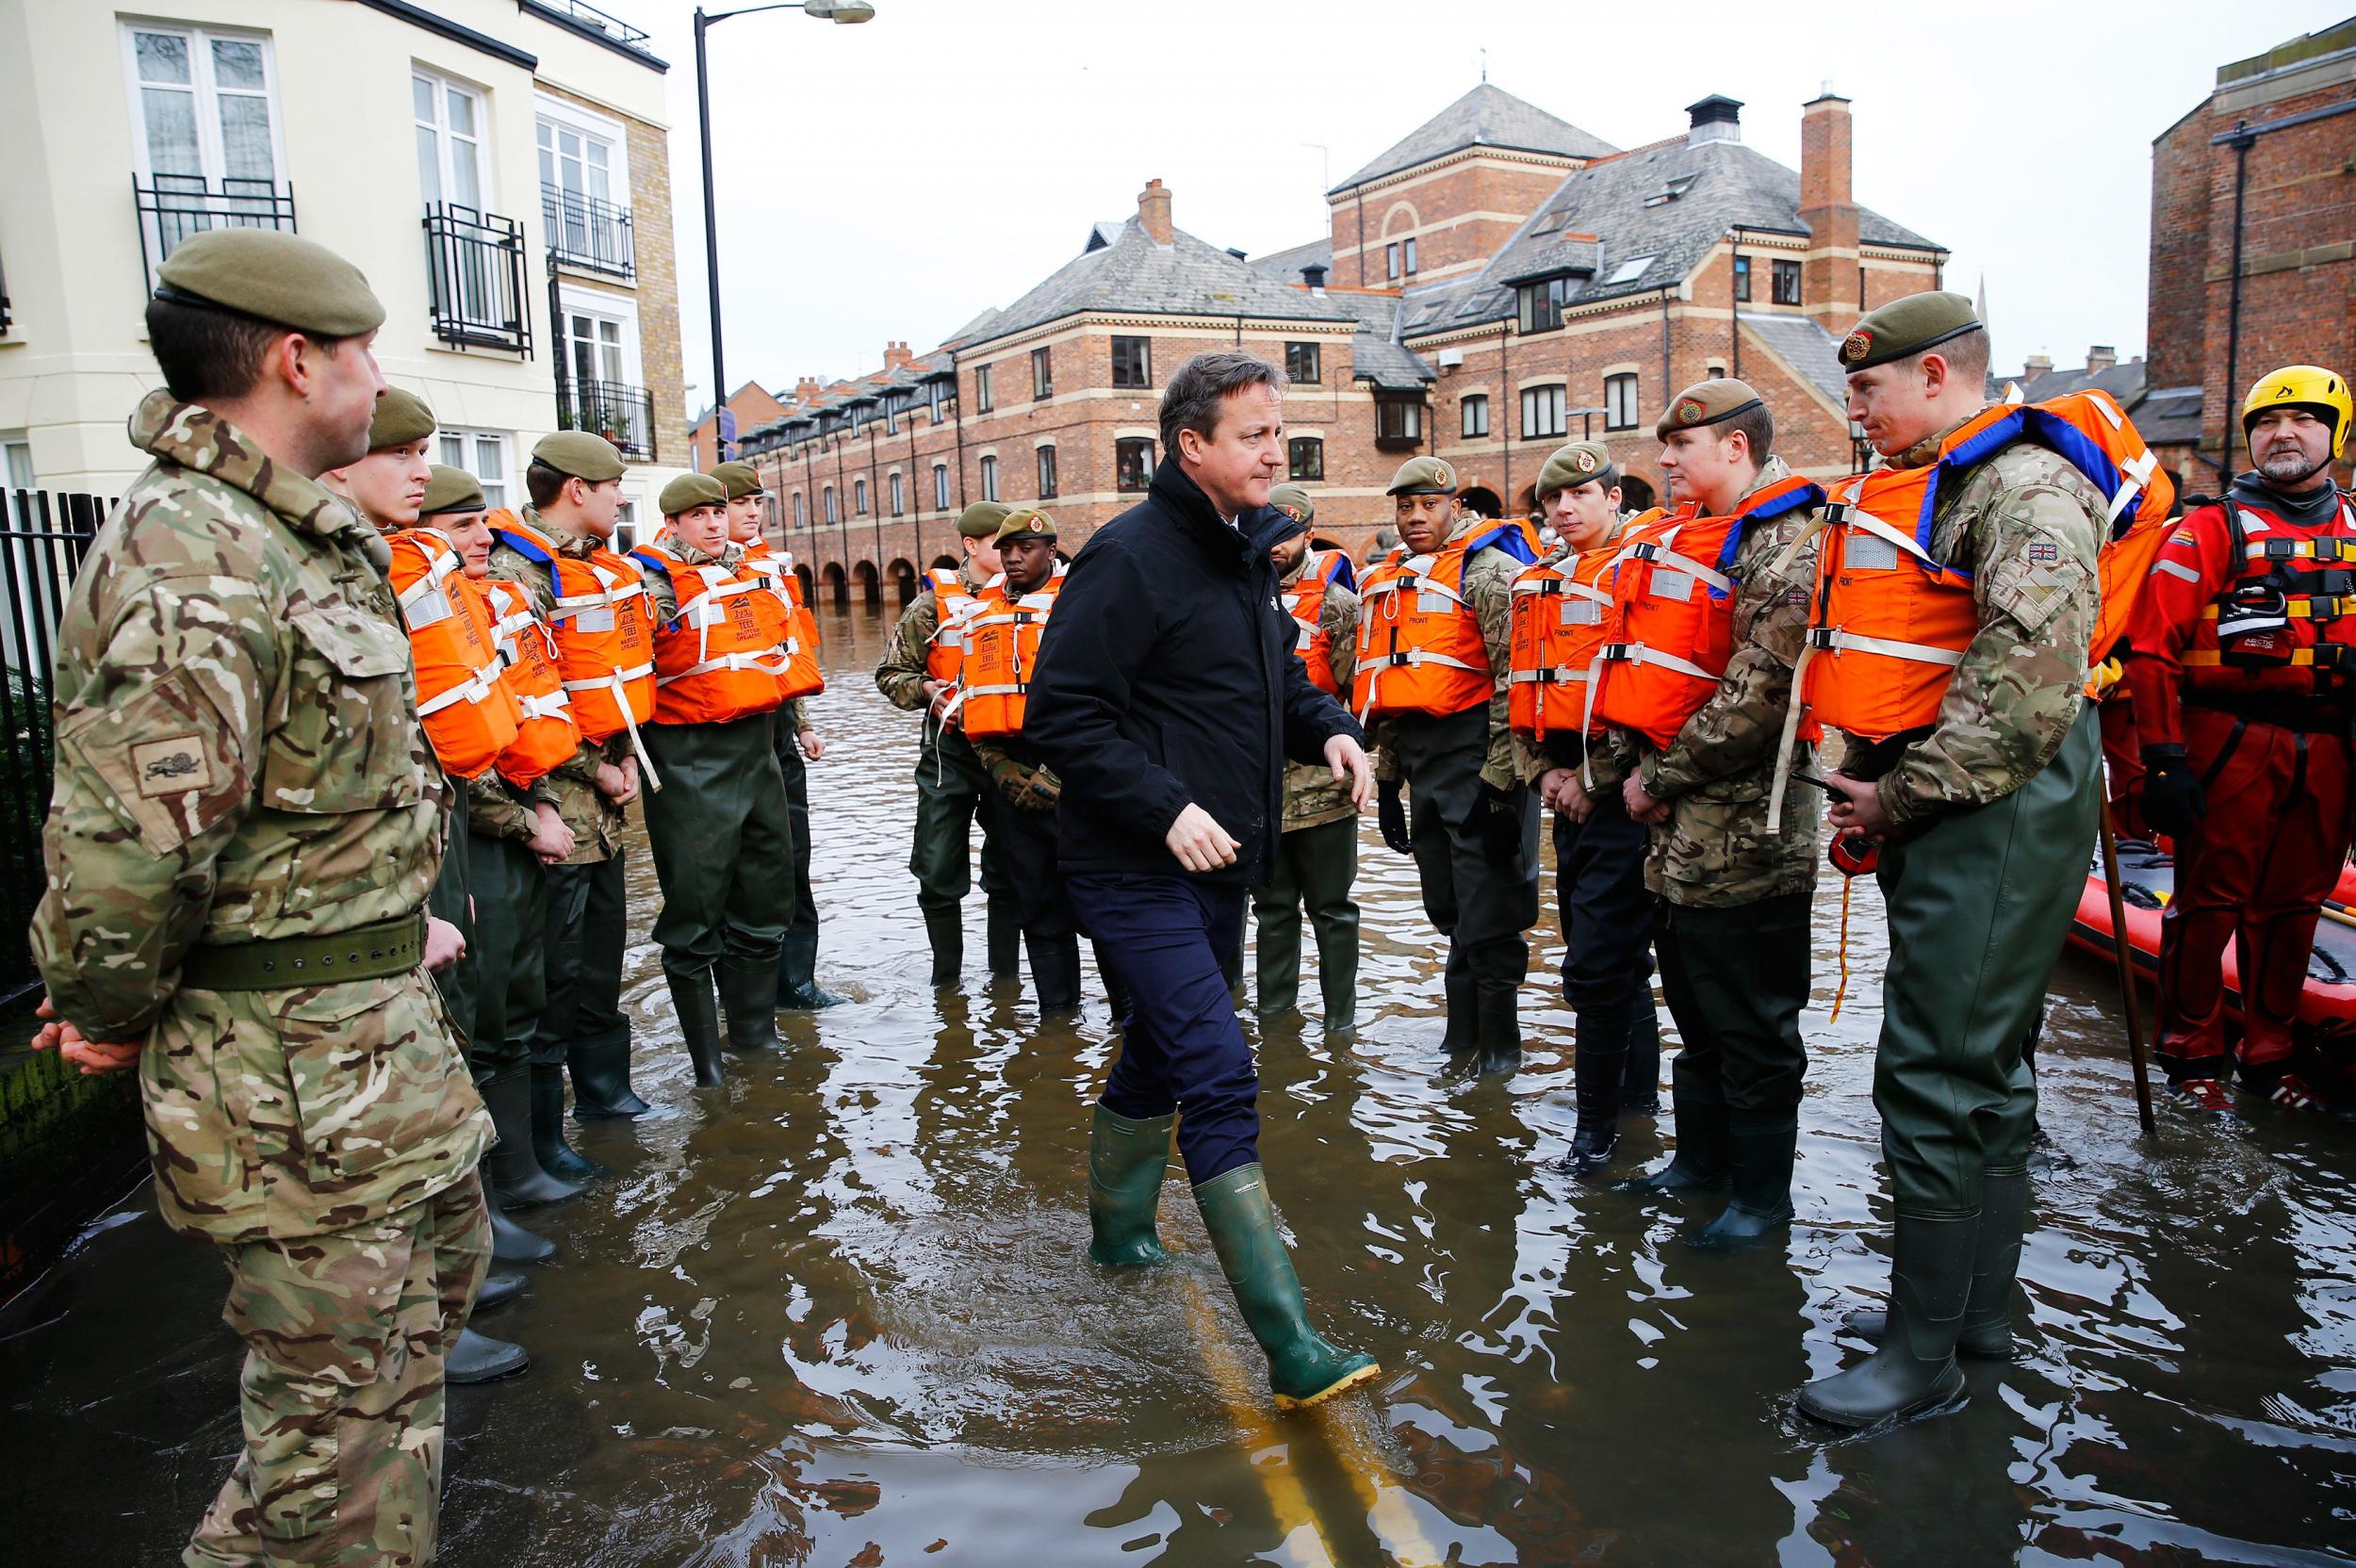 David Cameron visits soldiers working on flood relief in York city centre